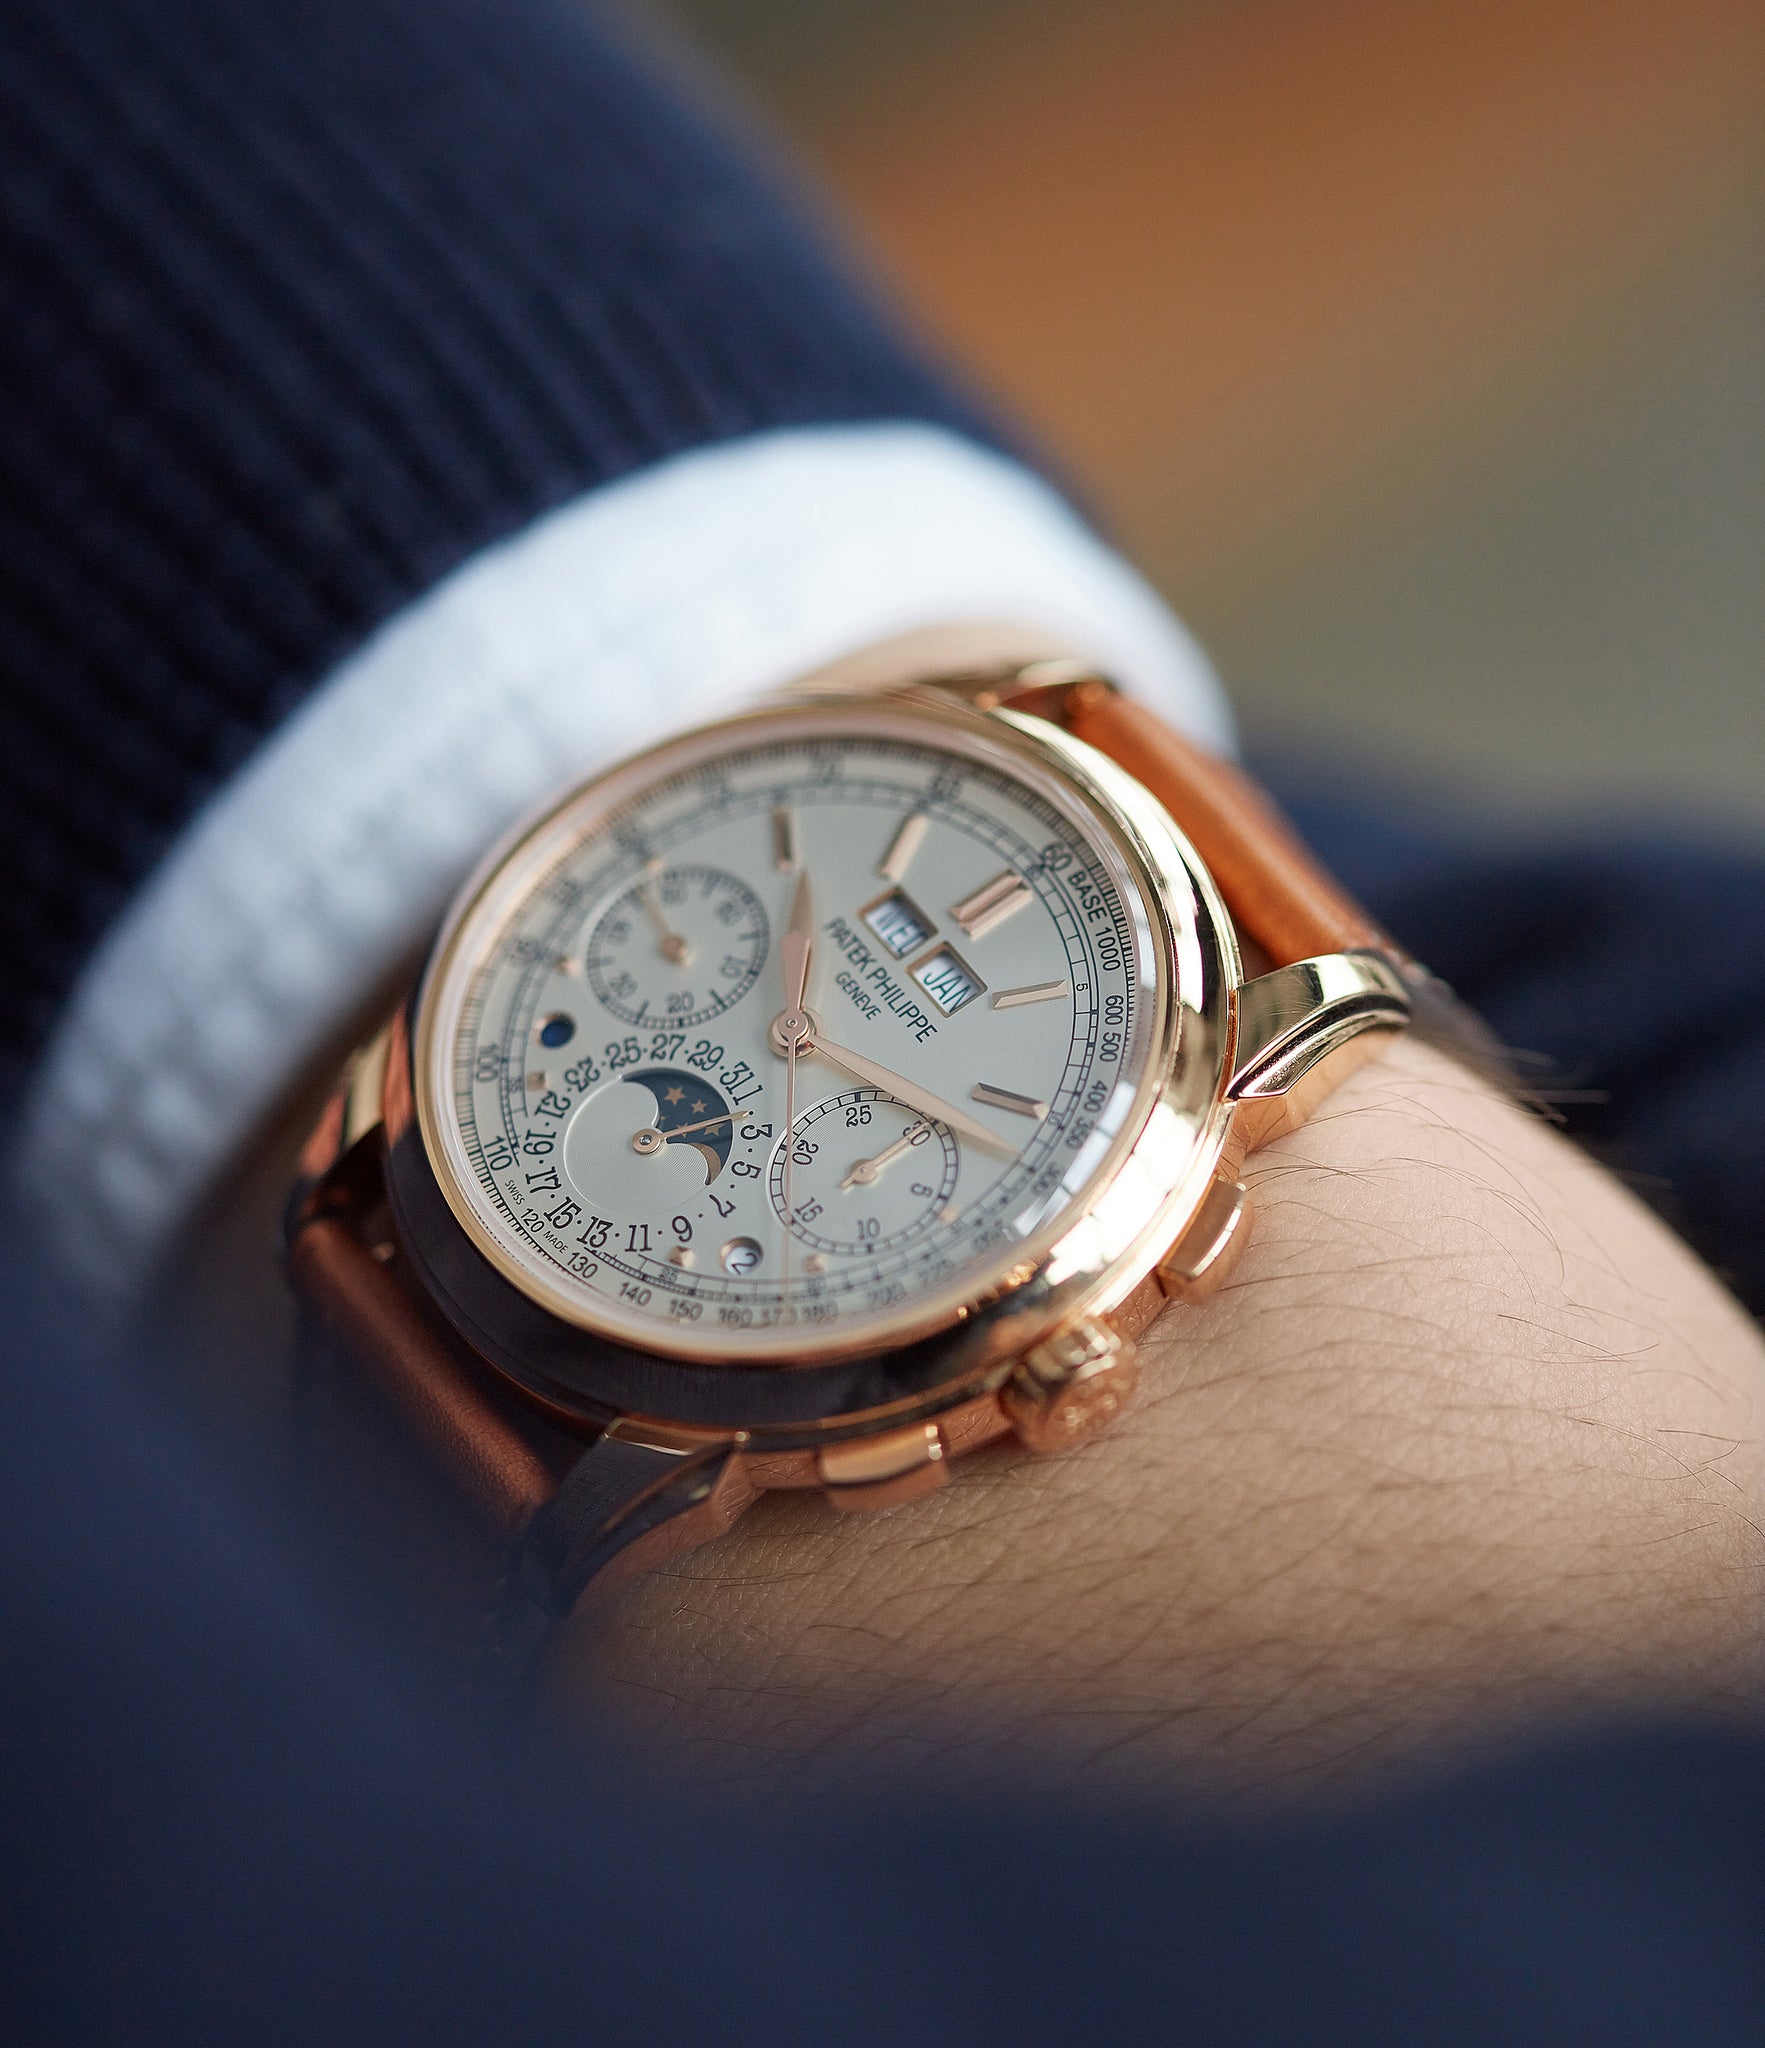 pre-owned Patek Philippe 5270R Grand Complications Perpetual Calendar Chronograph rose gold dress watch for sale online at A Collected Man London UK specialist of rare watches